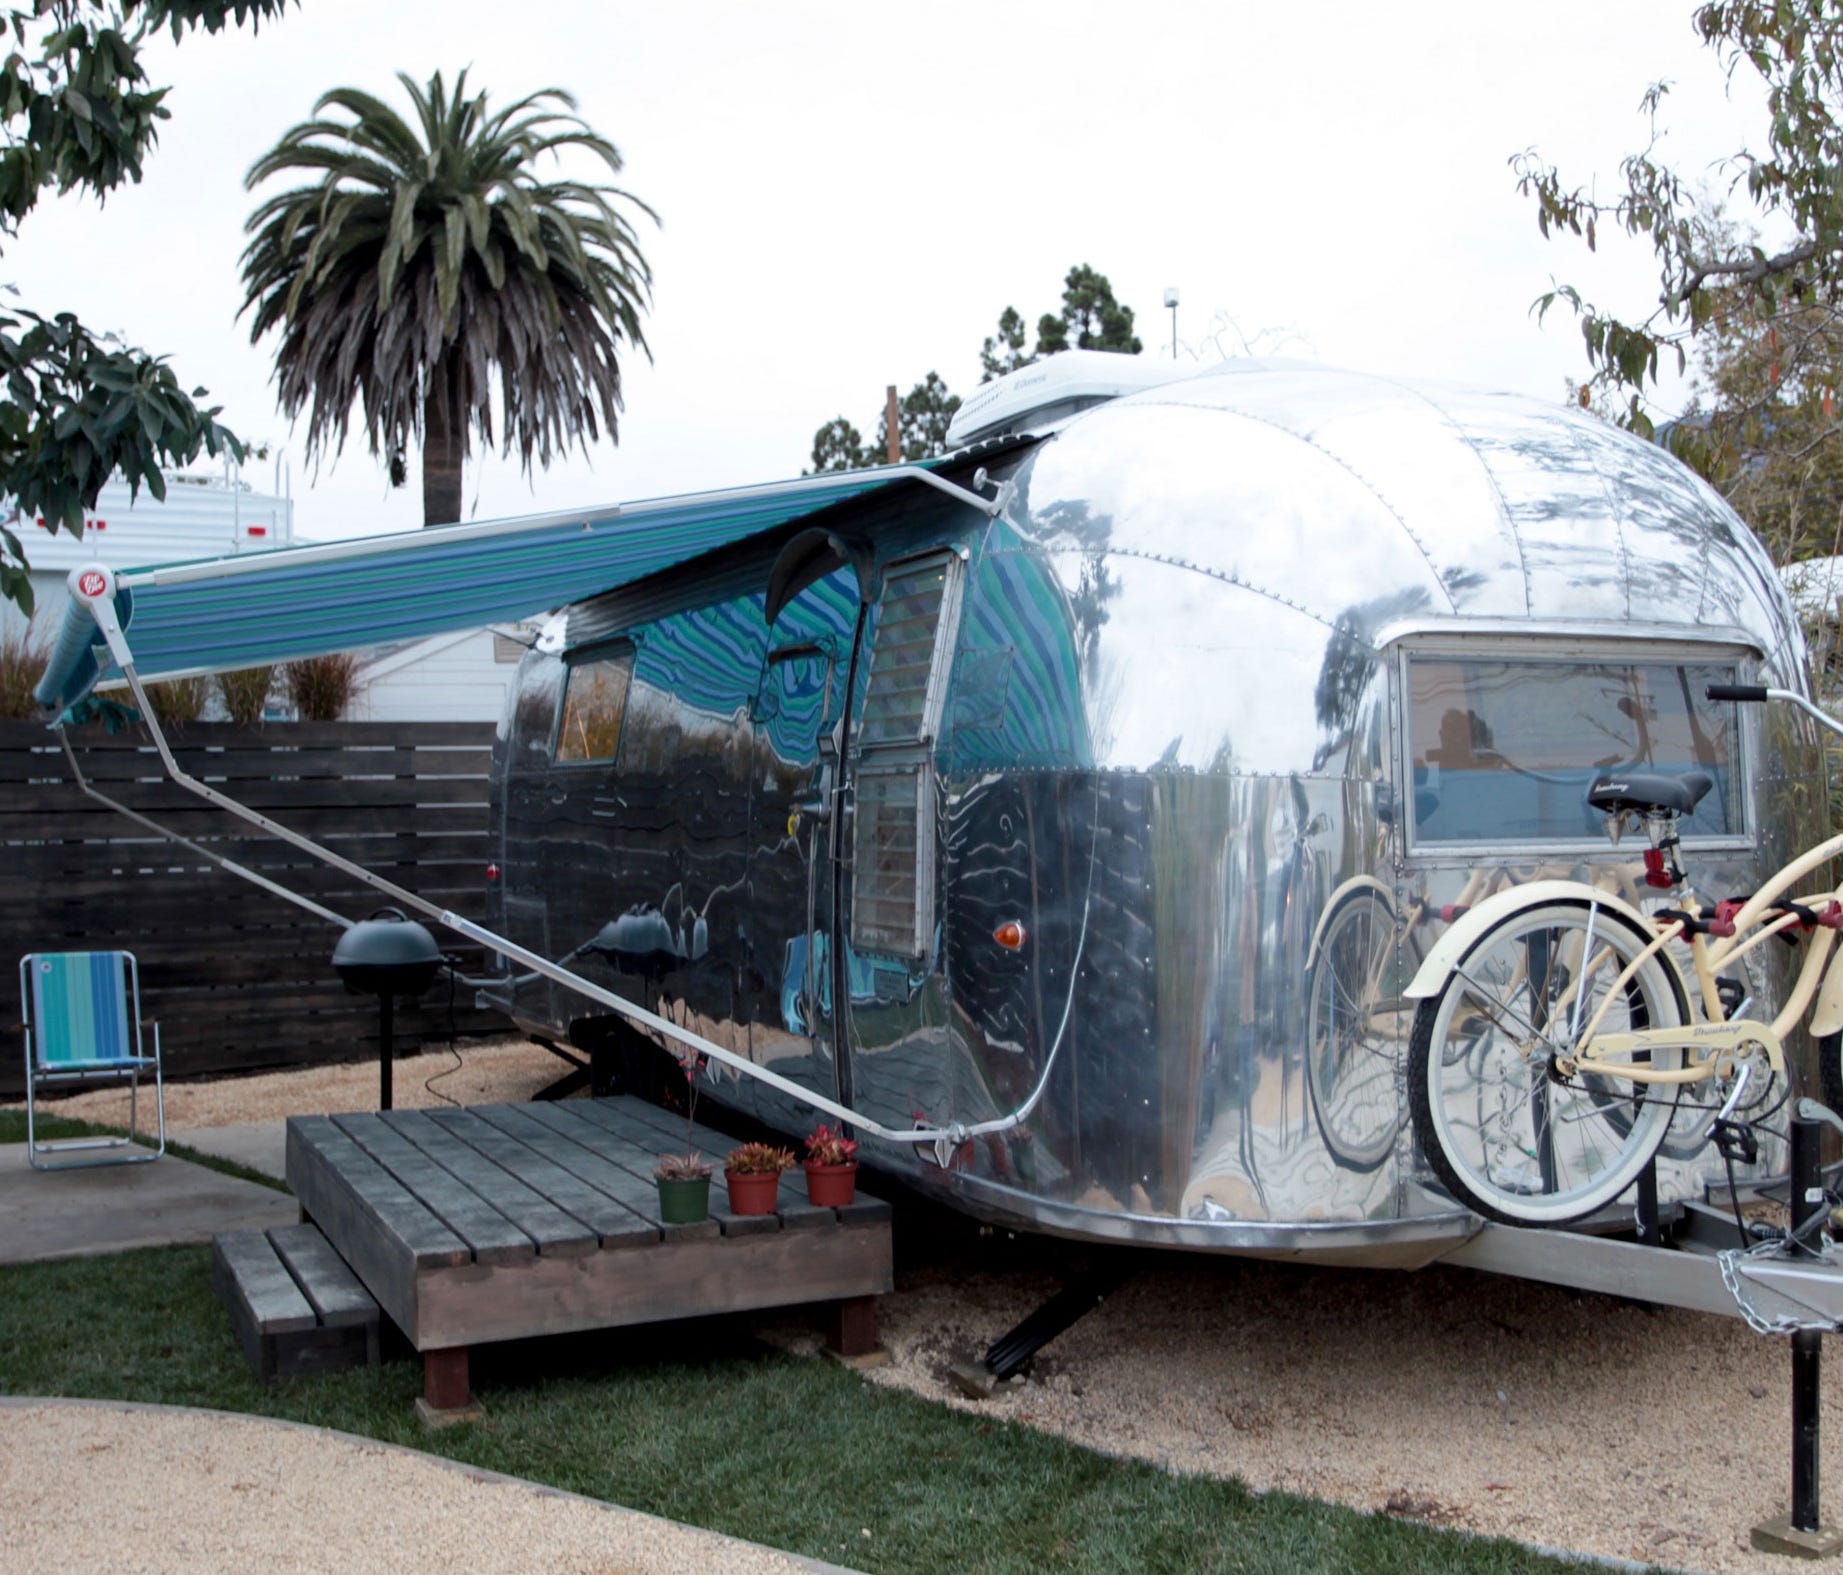 Each Airstream is outfitted with an outdoor electric grill and guests are free to use retro beach cruisers.